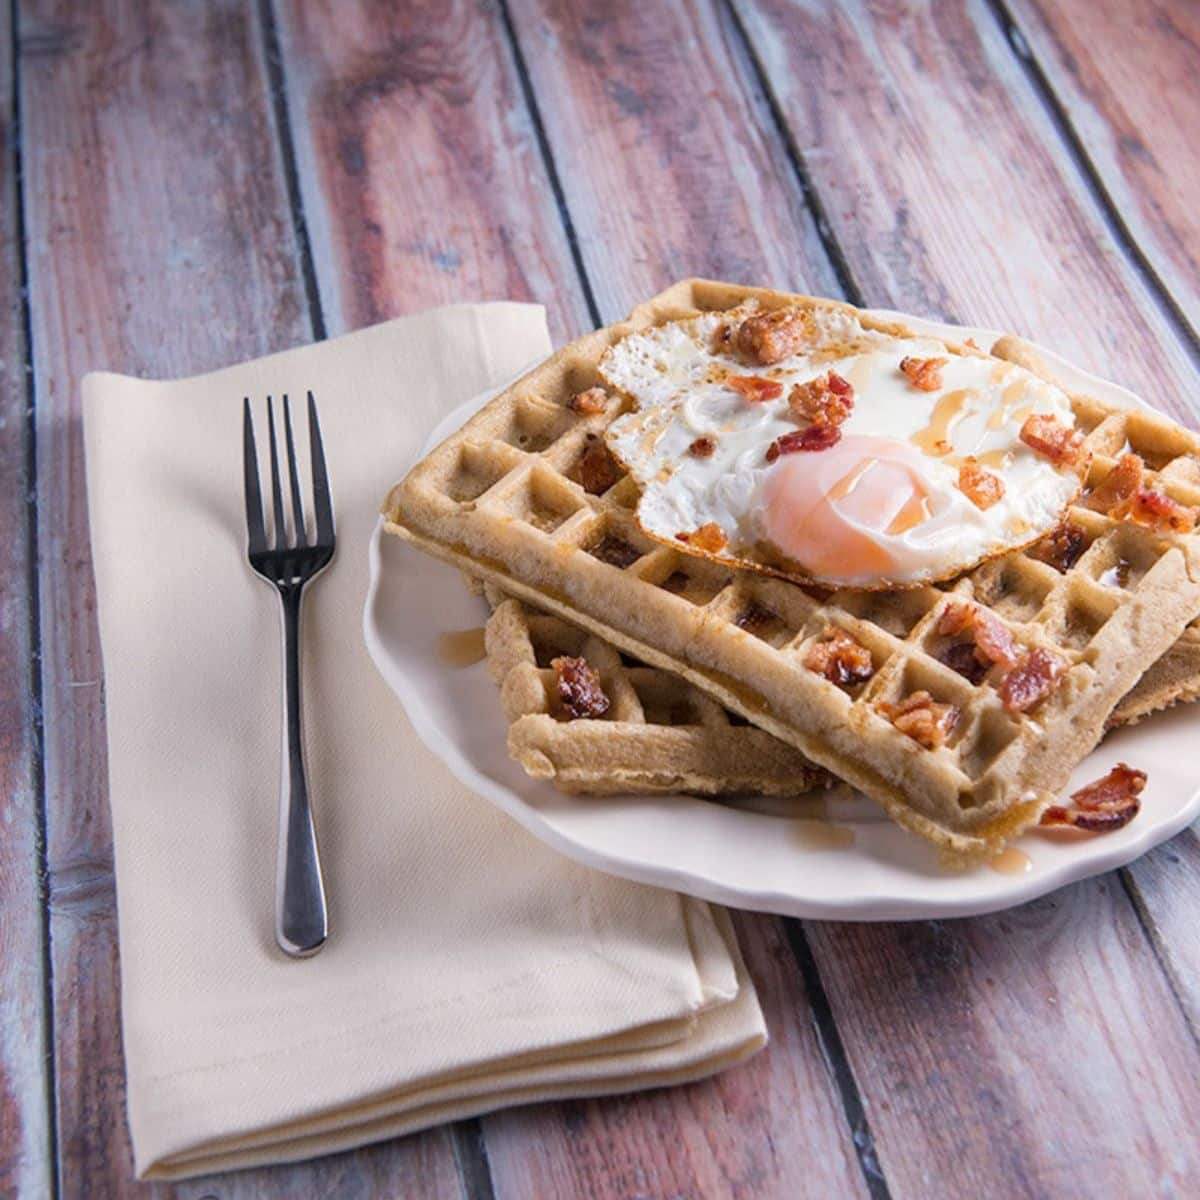 https://paleoleap.com/wp-content/uploads/2015/08/bacon-maple-syrup-waffles-with-fried-egg-featured.jpg